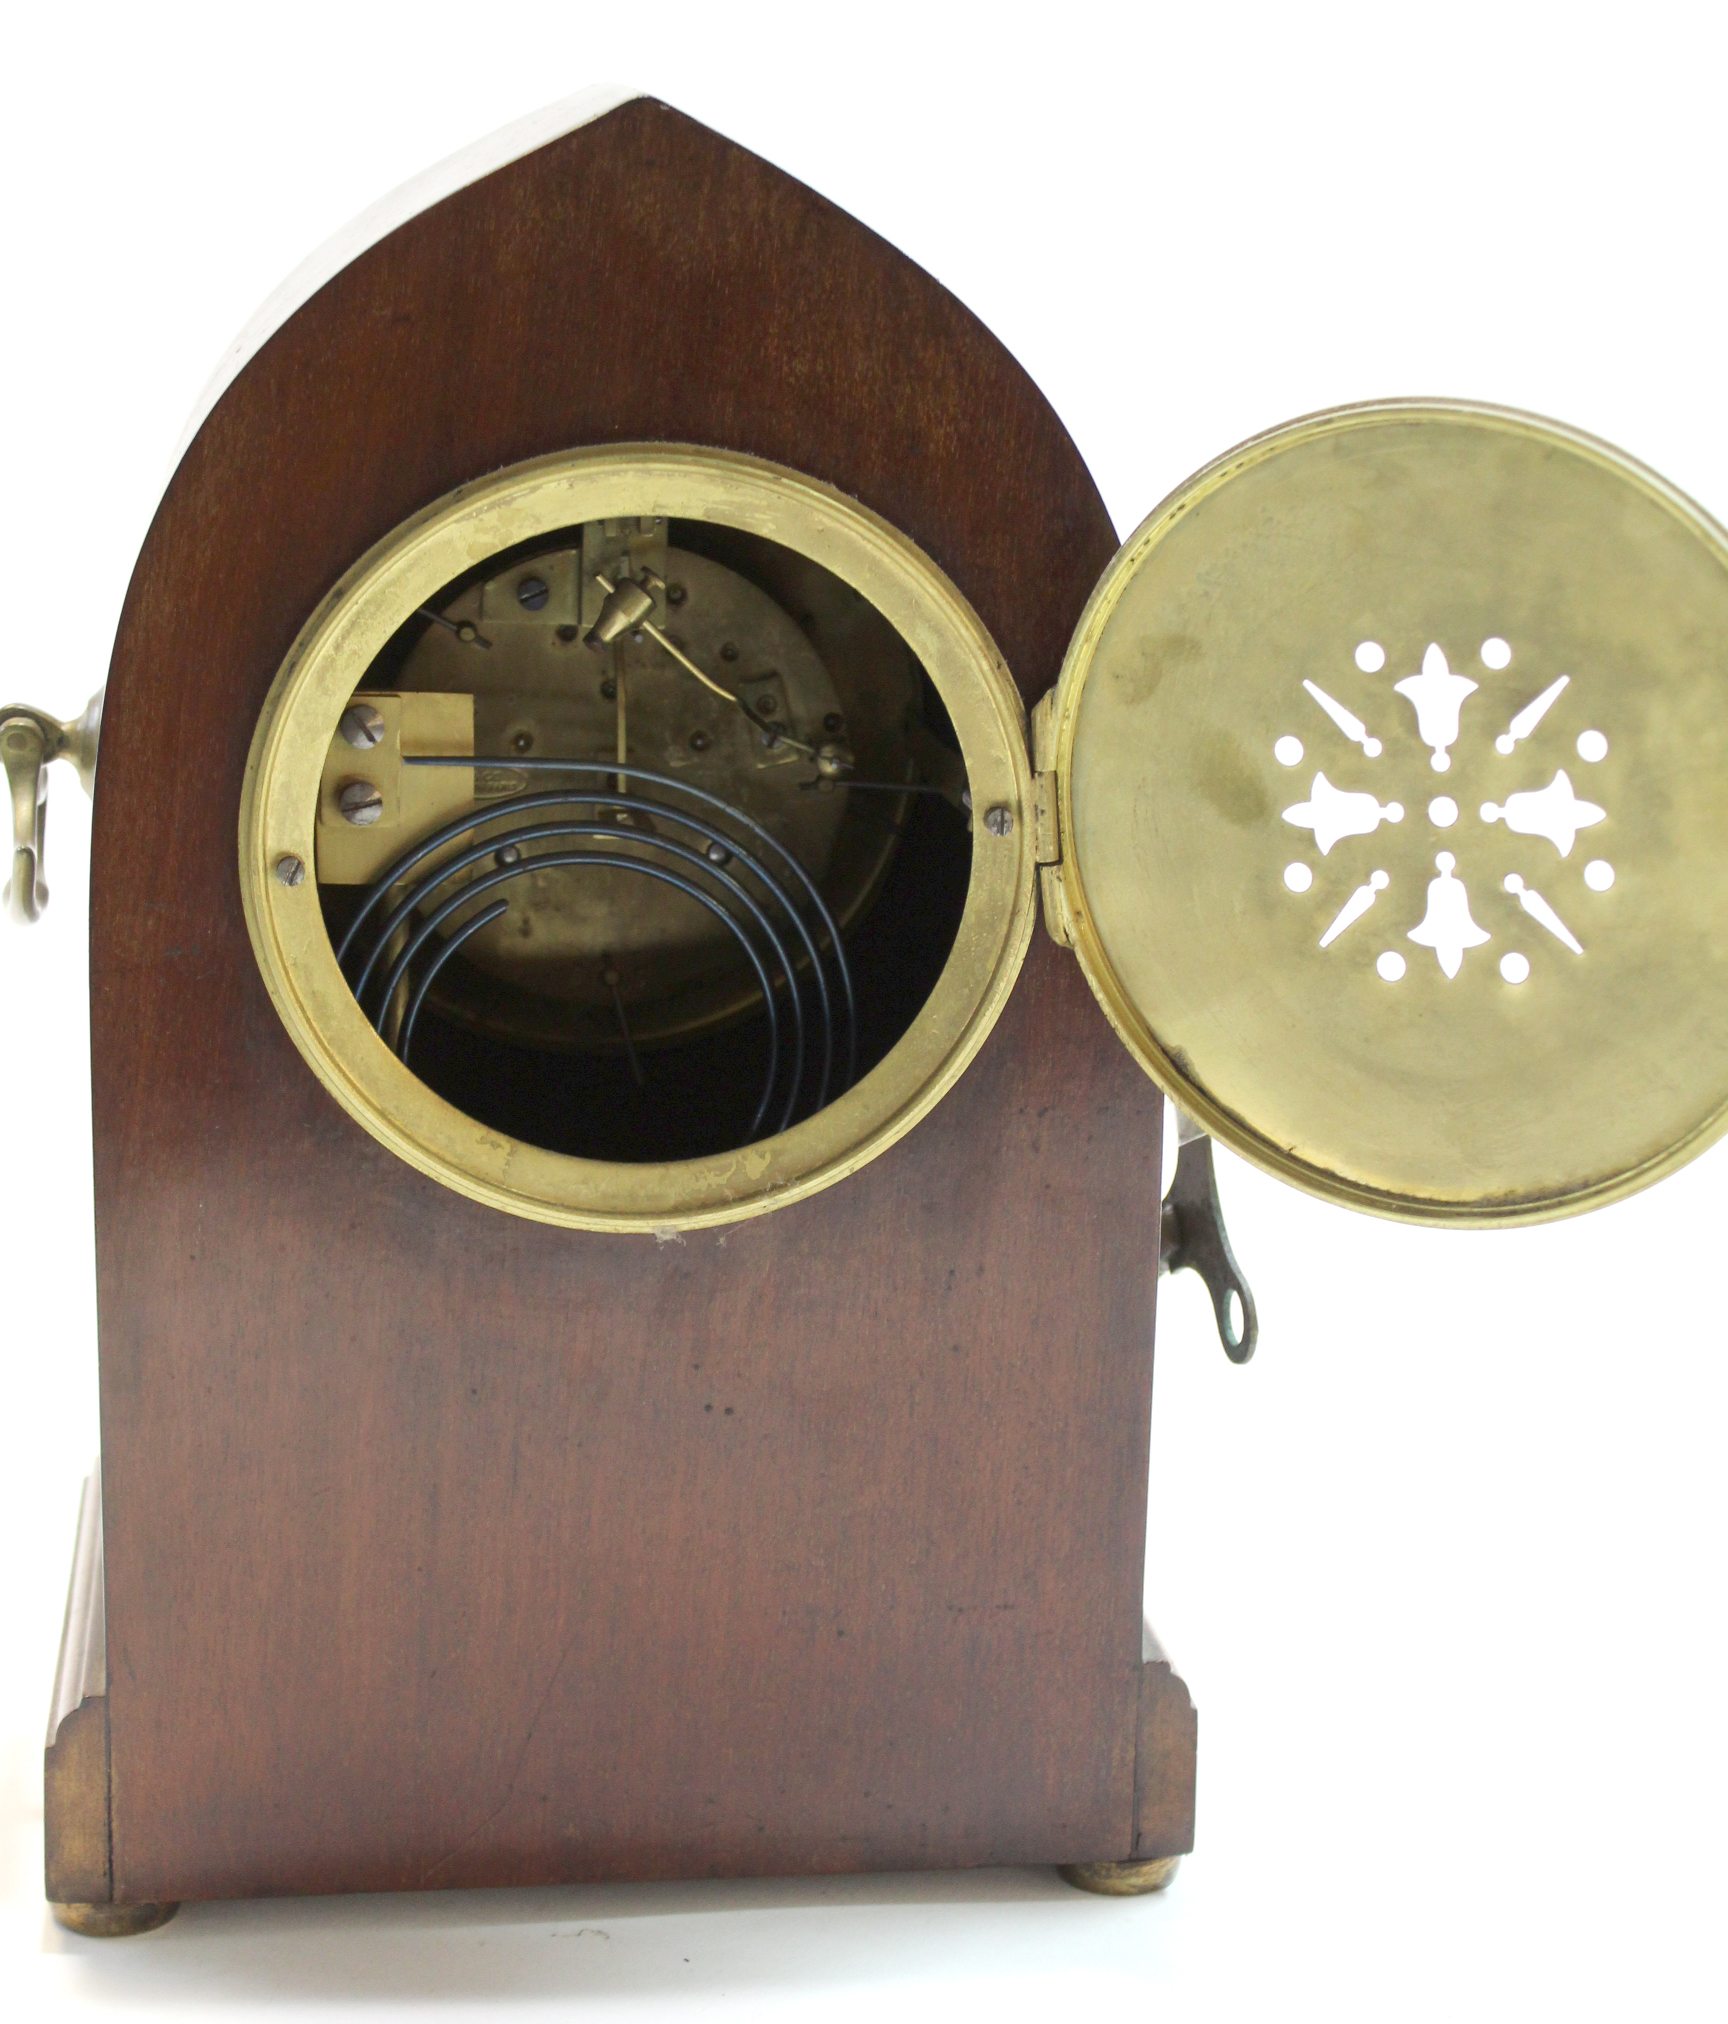 Edwardian bracket clock by S Money of Lowestoft, the clock in lancet style case with brass handles - Image 2 of 4